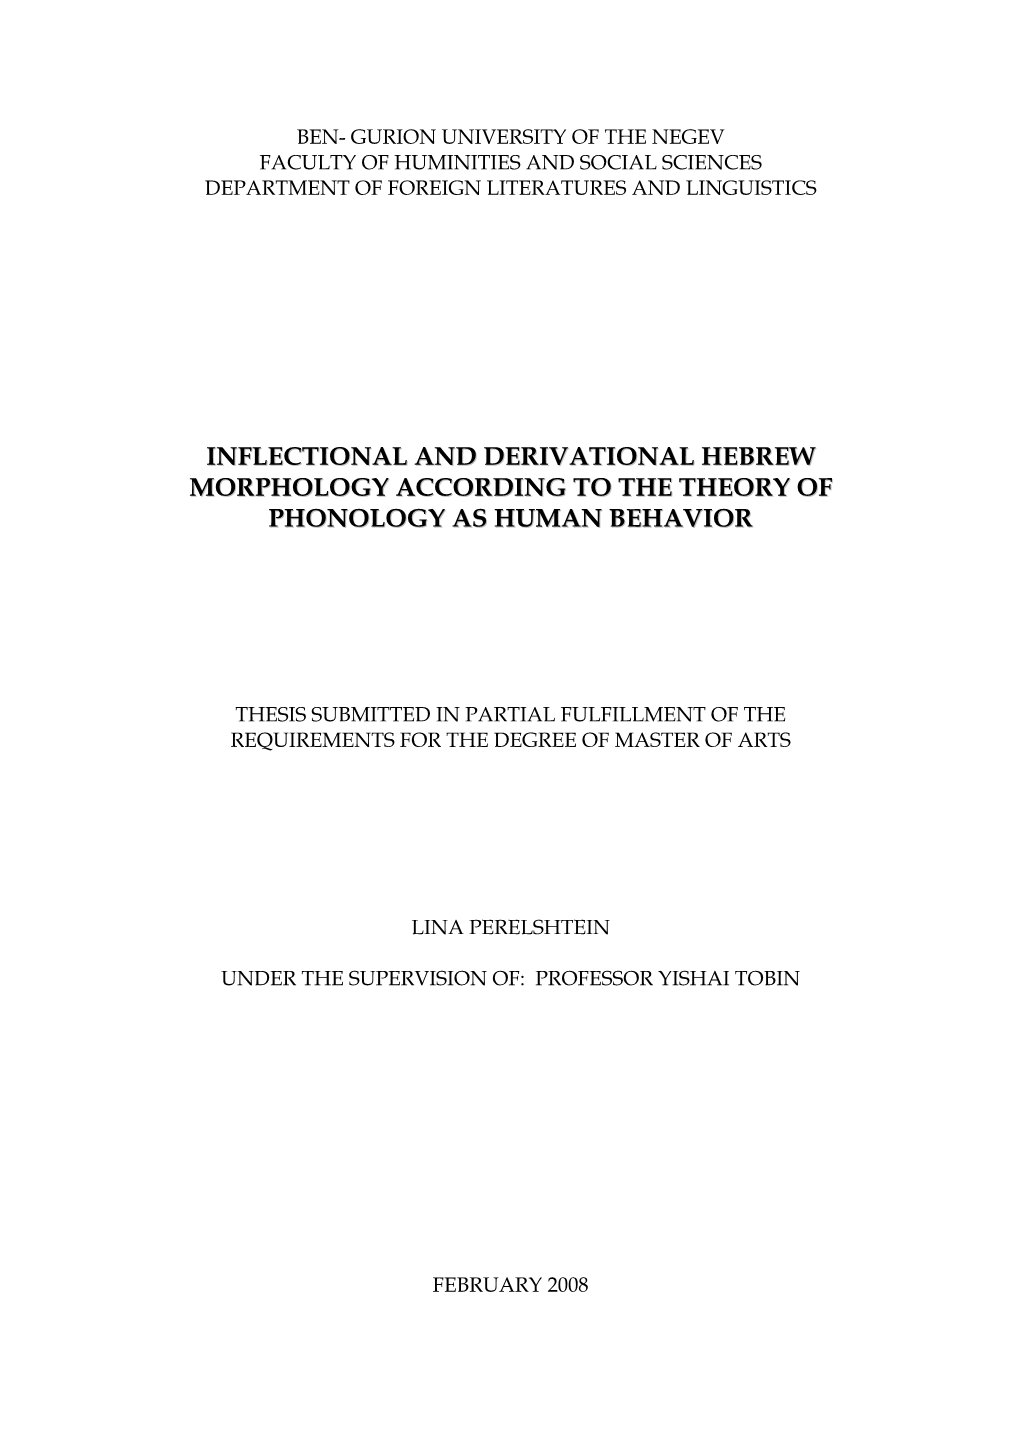 Inflectional and Derivational Hebrew Morphology According to the Theory of Phonology As Human Behavior